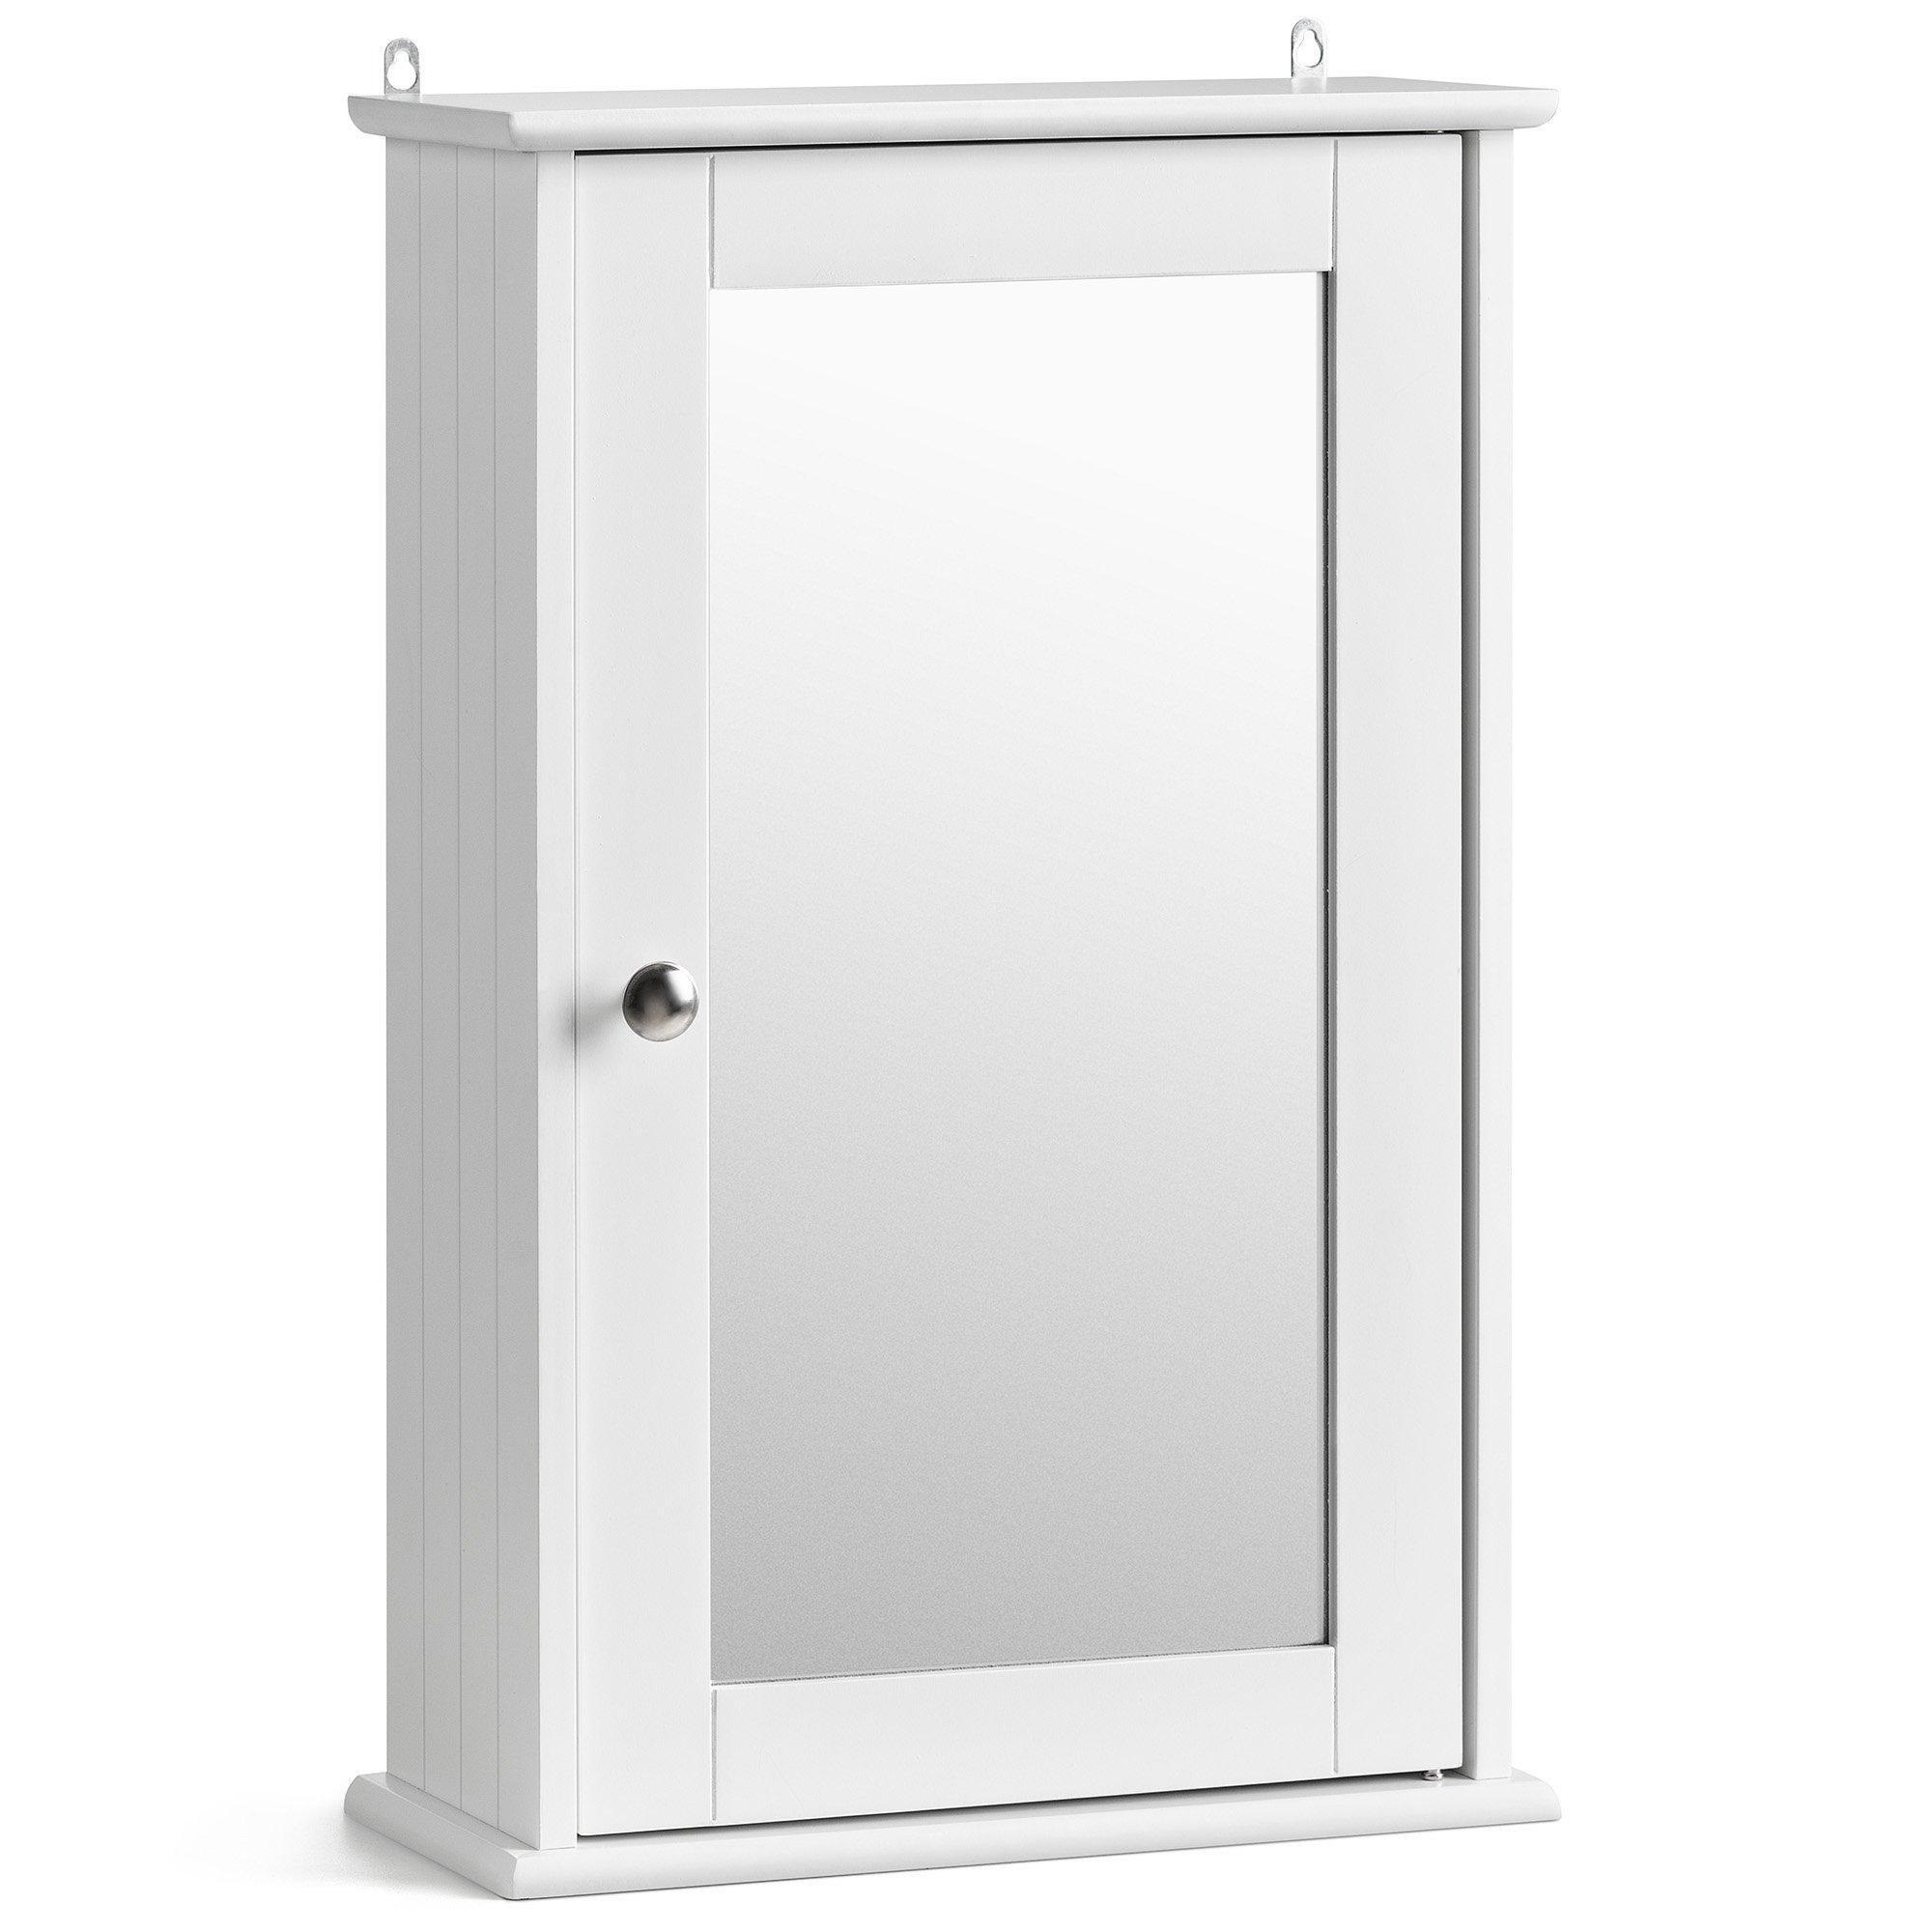 Bathroom Mirror Cabinet White Wooden Single Door Wall Mounted Unit Christow - image 1